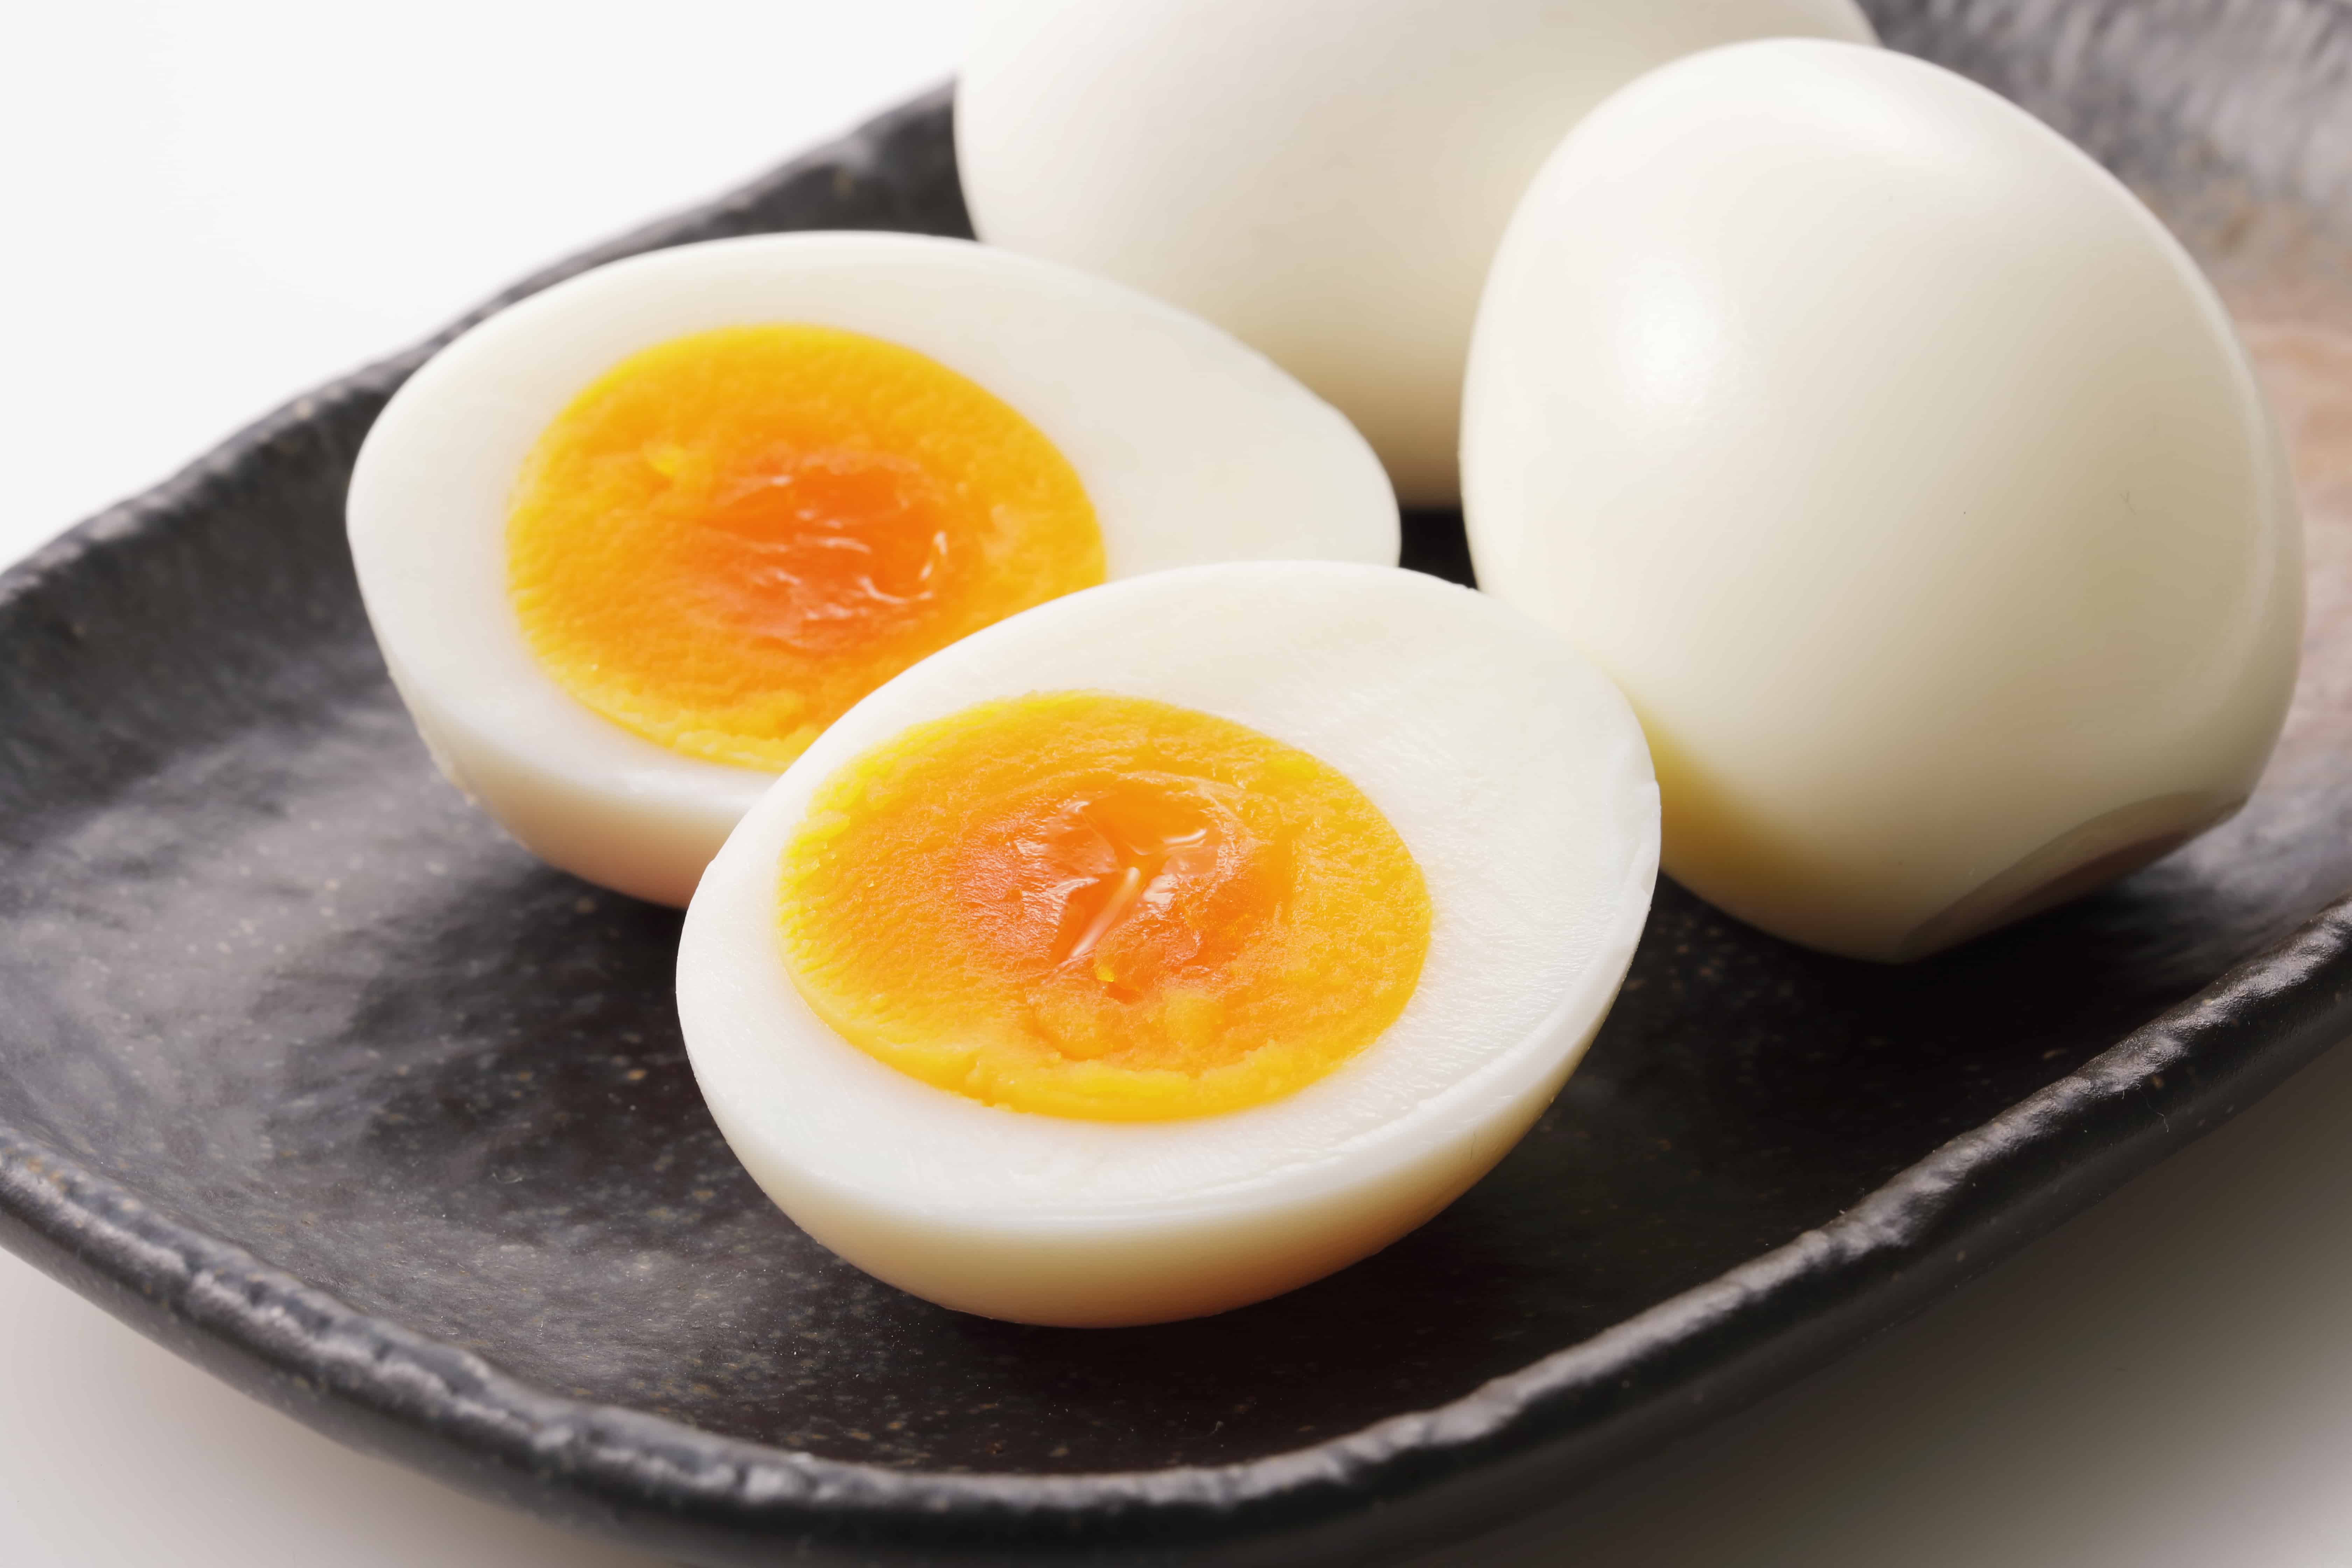 Soft boiled eggs, nutrition facts